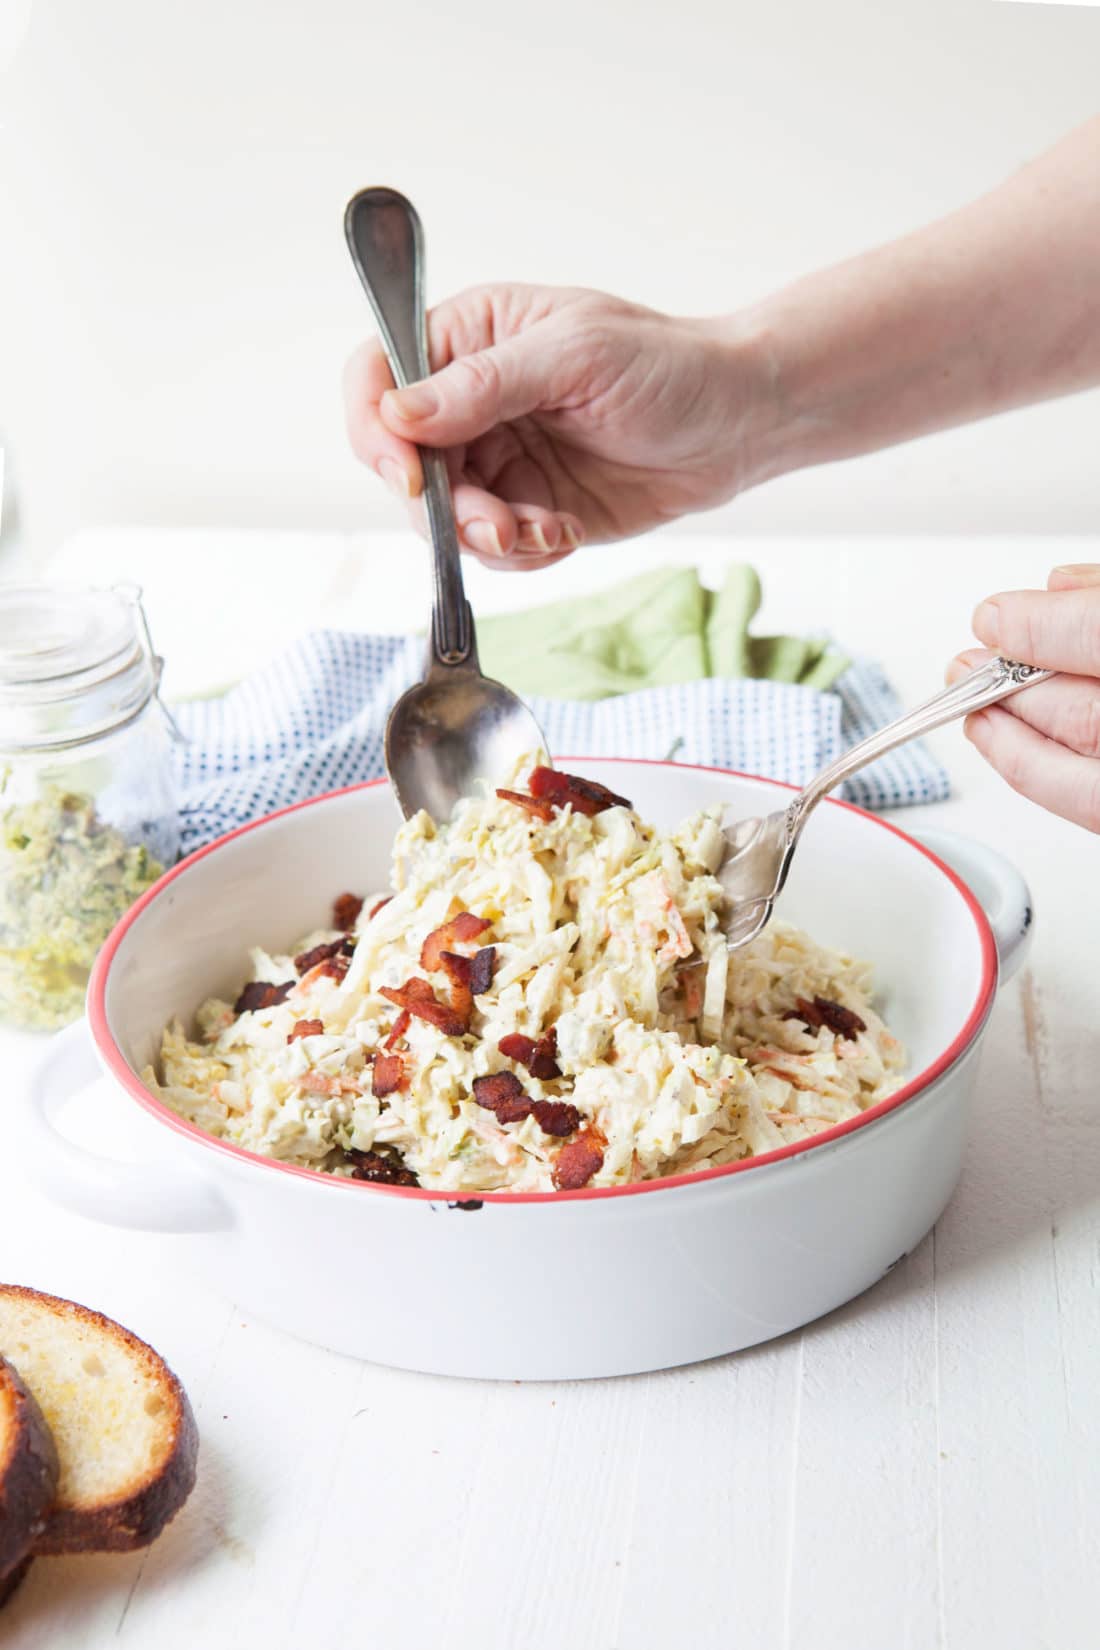 Two spoons scooping Creamy Blue Cheese and Bacon Coleslaw from a bowl.